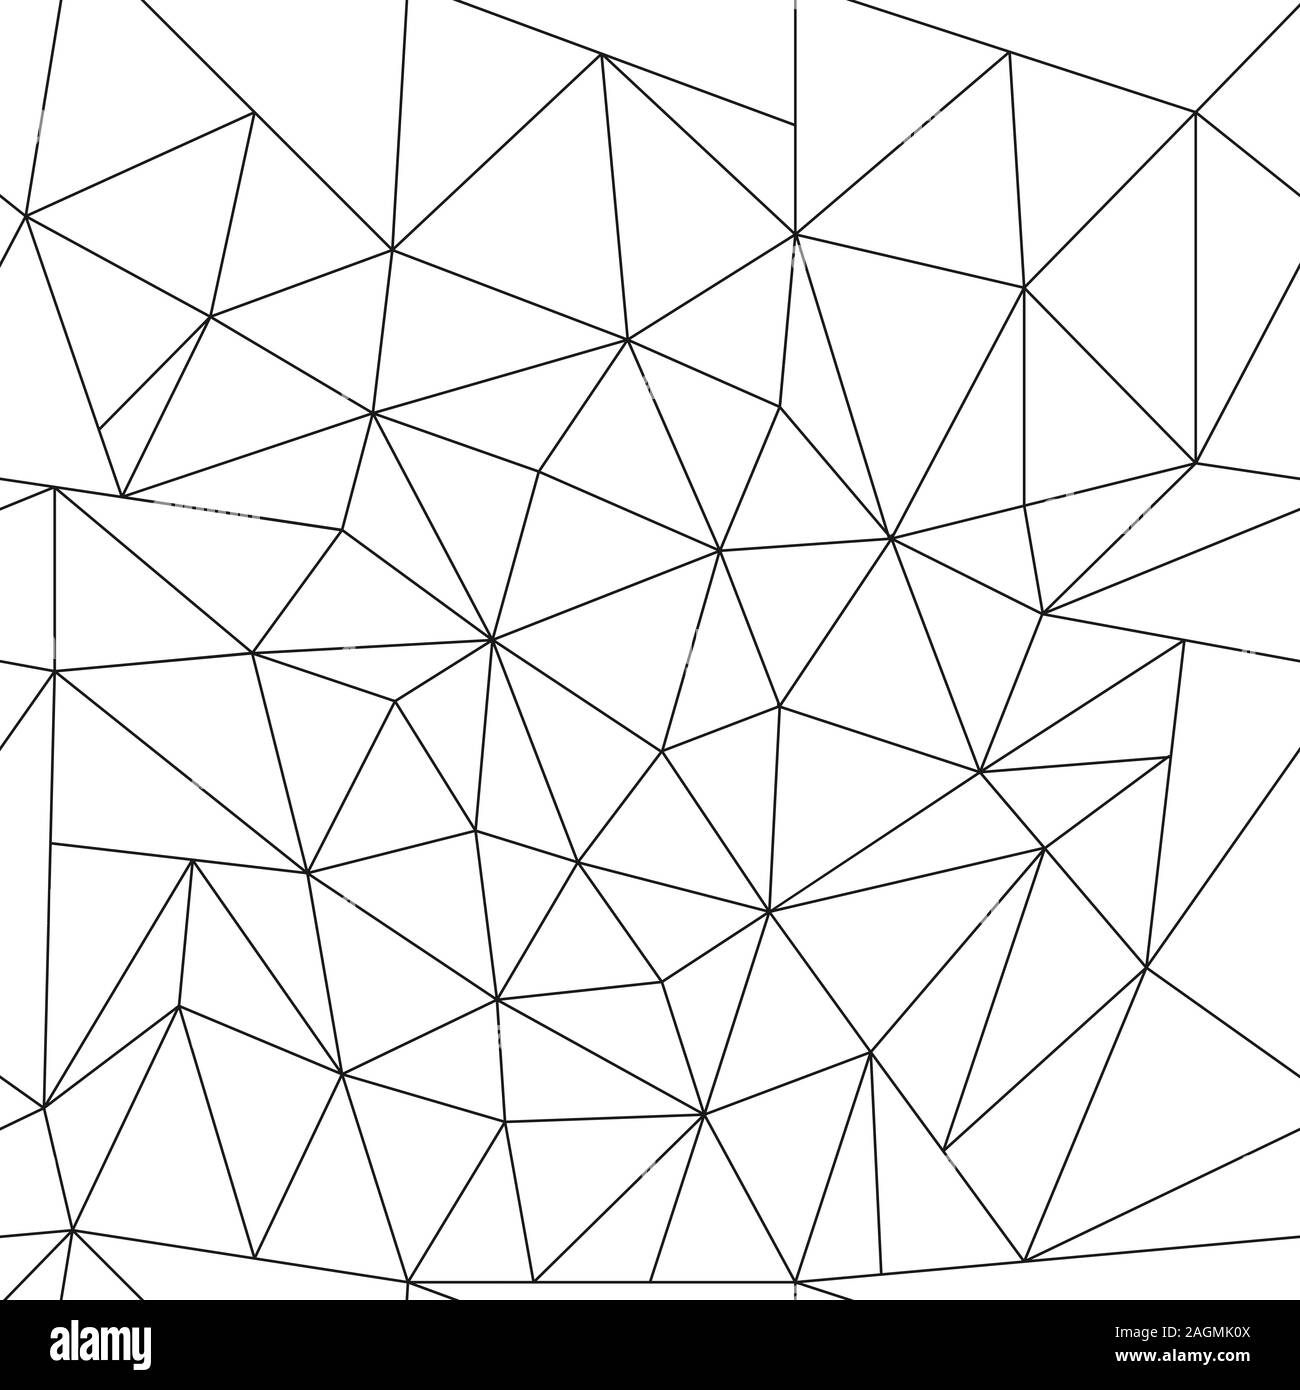 https://c8.alamy.com/comp/2AGMK0X/seamless-abstract-polygonal-contour-blank-pattern-a-pattern-of-chaotic-empty-triangles-simple-design-isolated-on-white-background-seamless-colorin-2AGMK0X.jpg